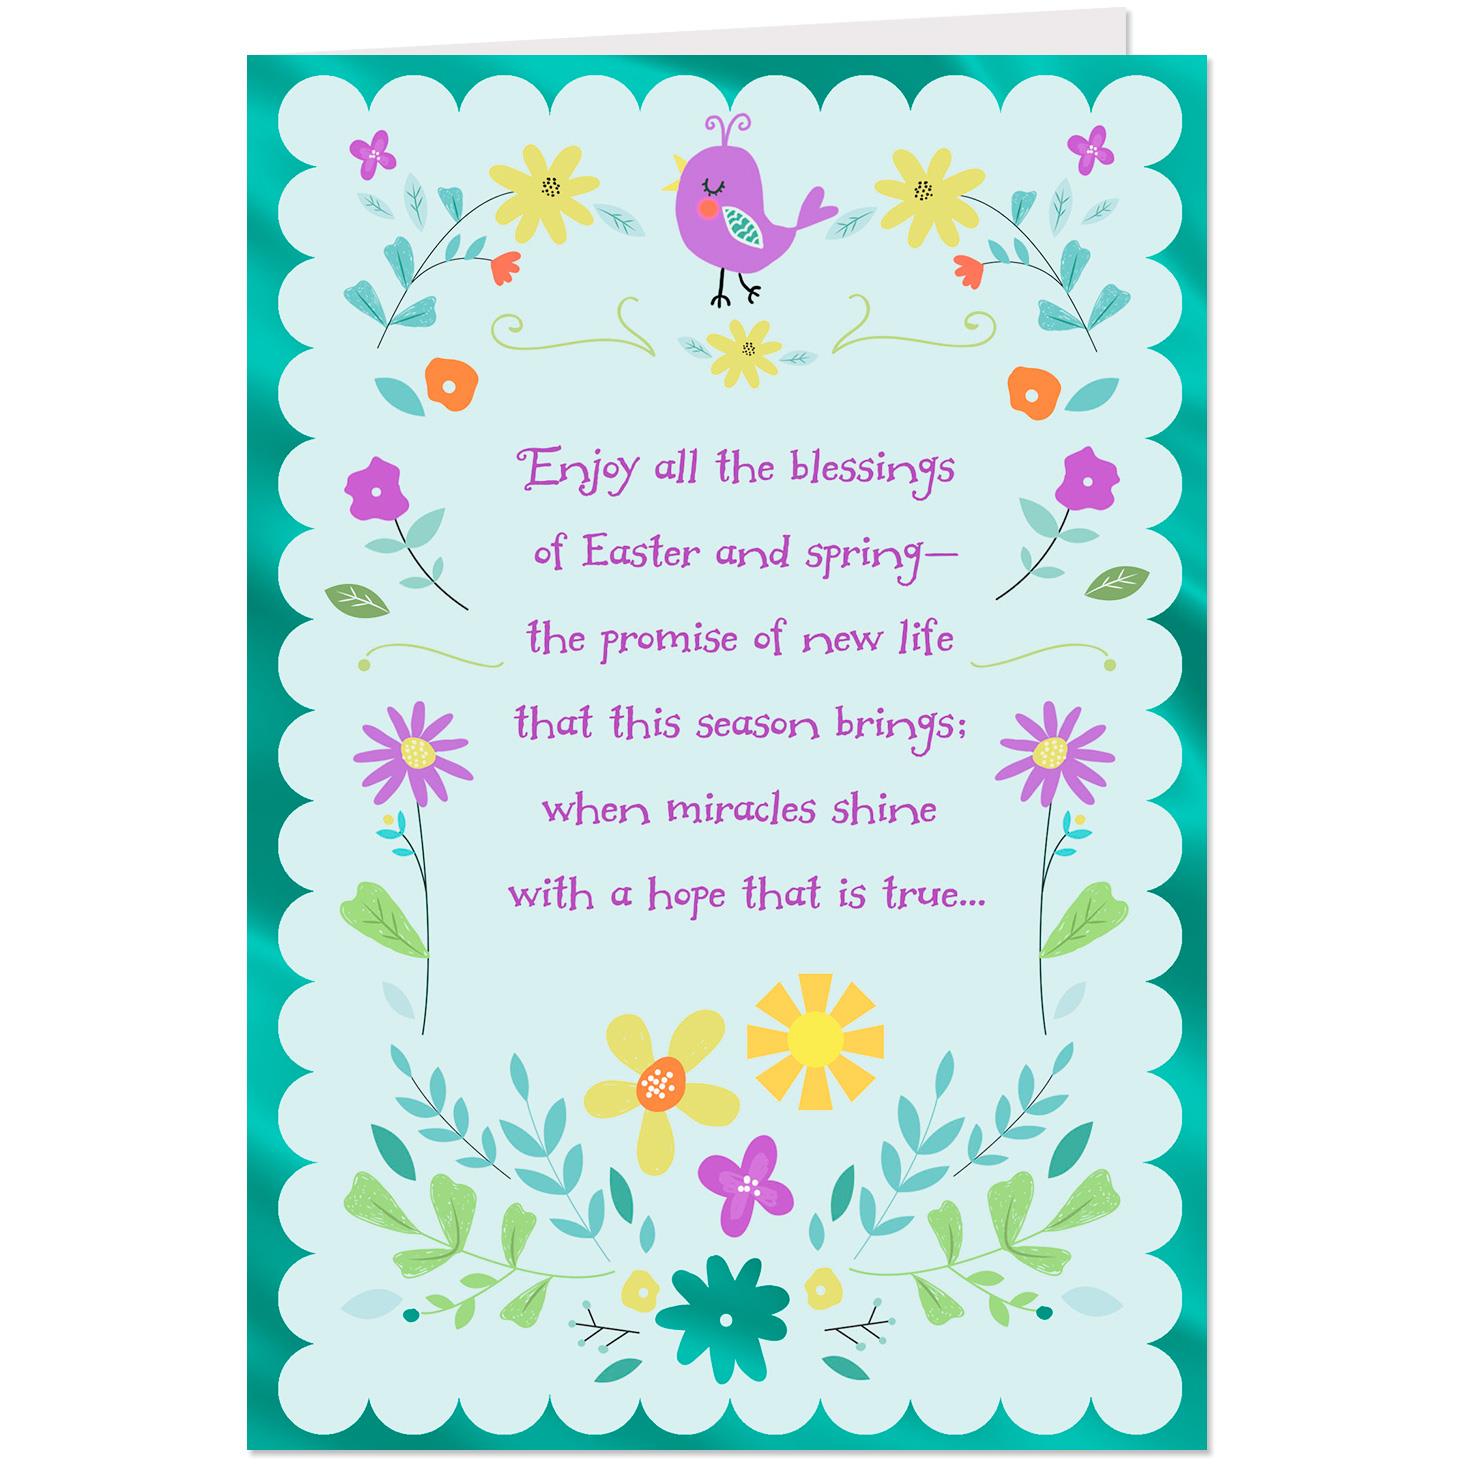 Blessings of Easter and Spring Religious Easter Cards, Pack of 10 - Boxed Cards - Hallmark